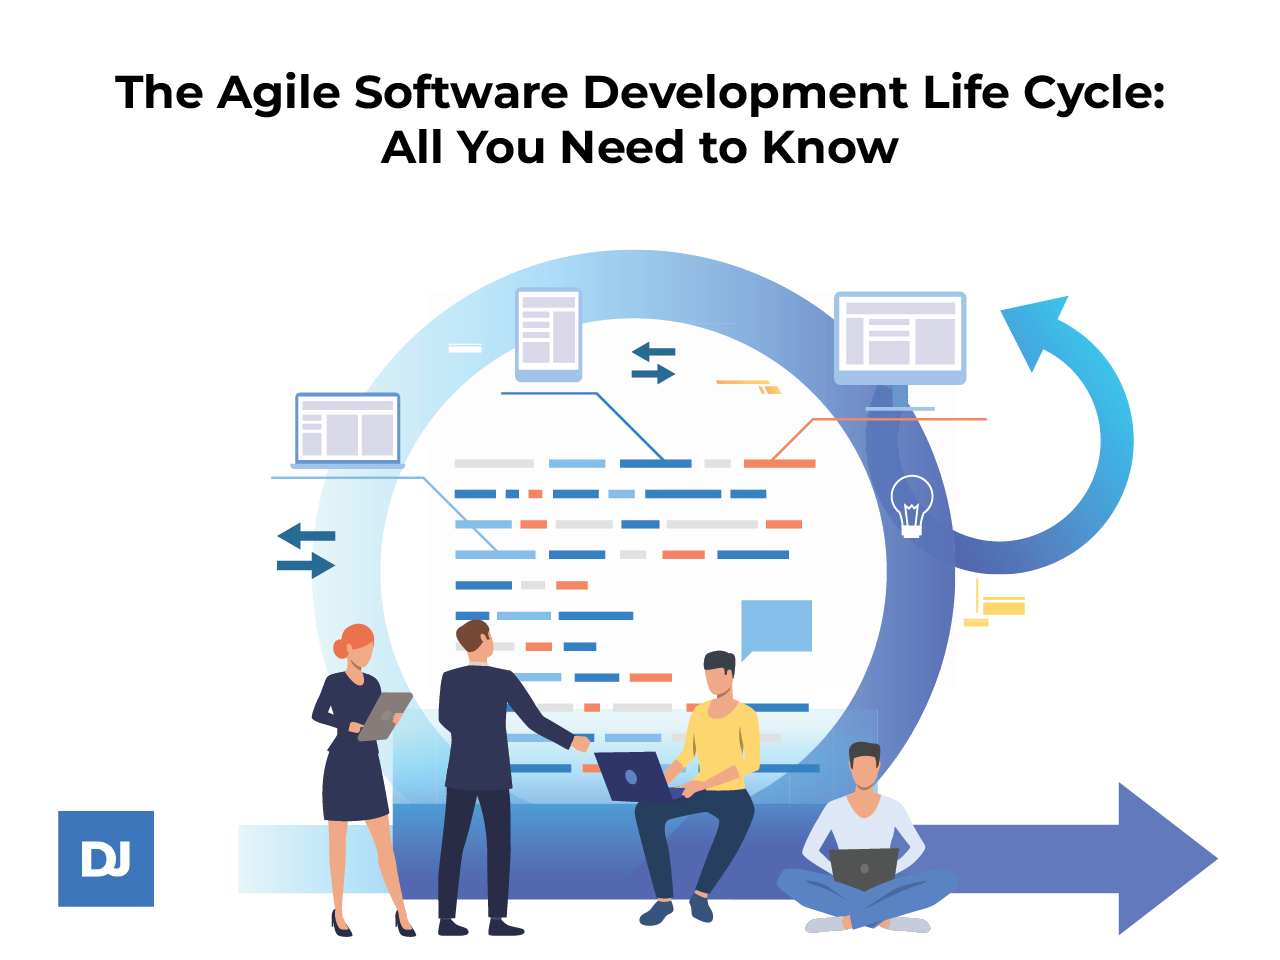 The Agile Software Development Life Cycle: All You Need to Know